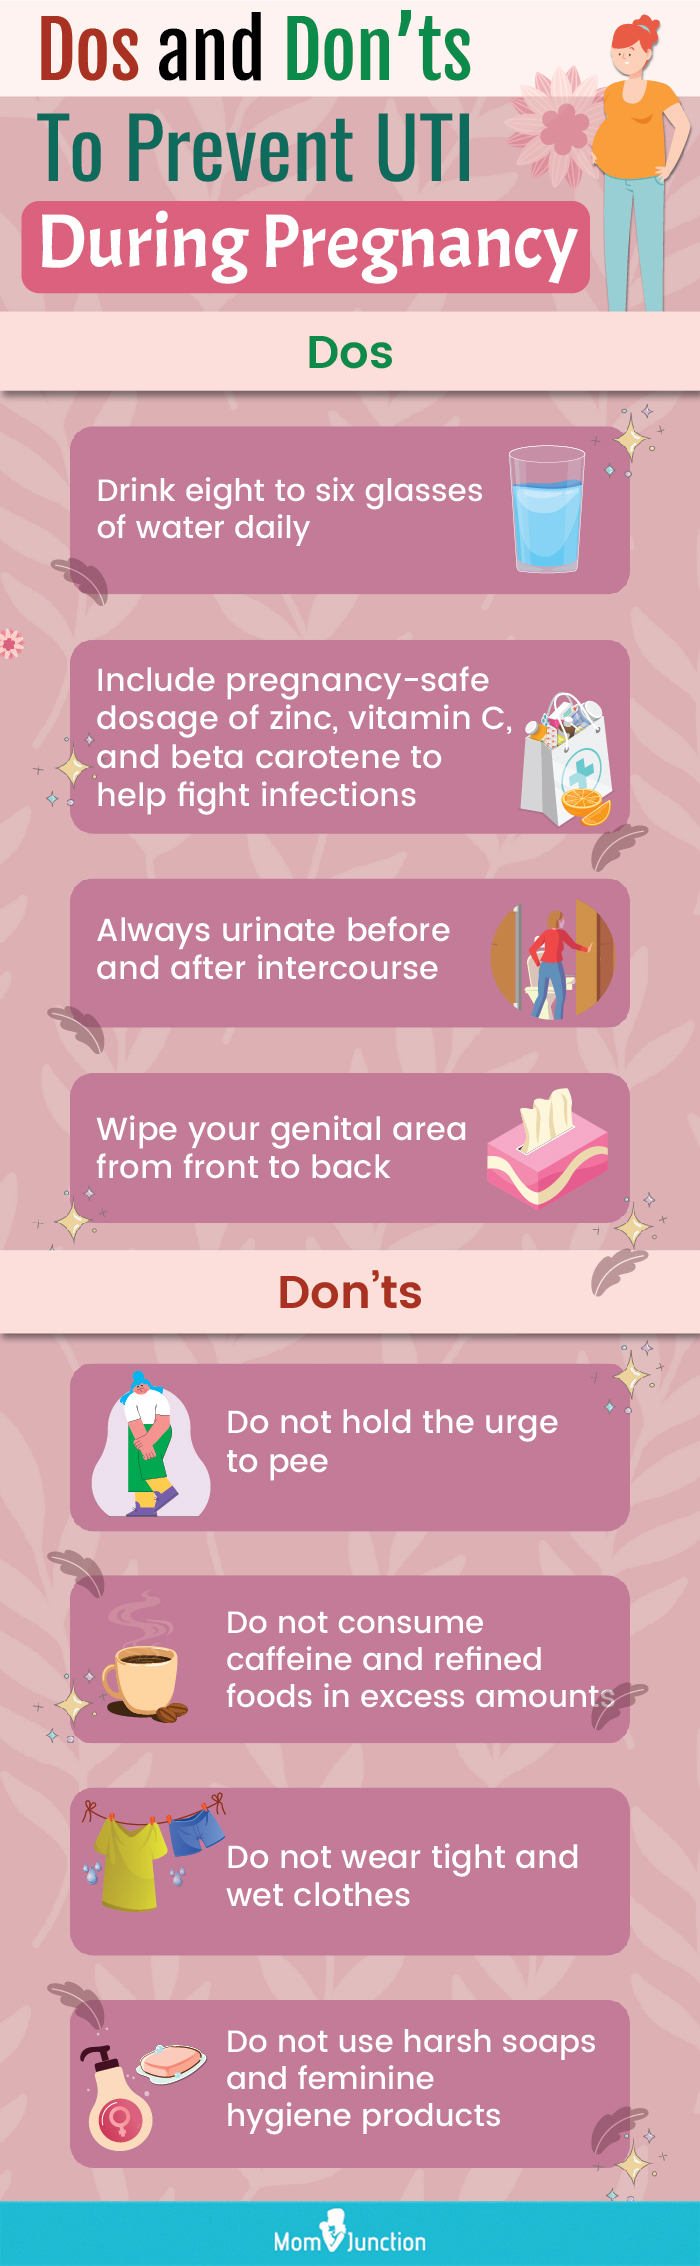 tips to help prevent uti in pregnancy (infographic)